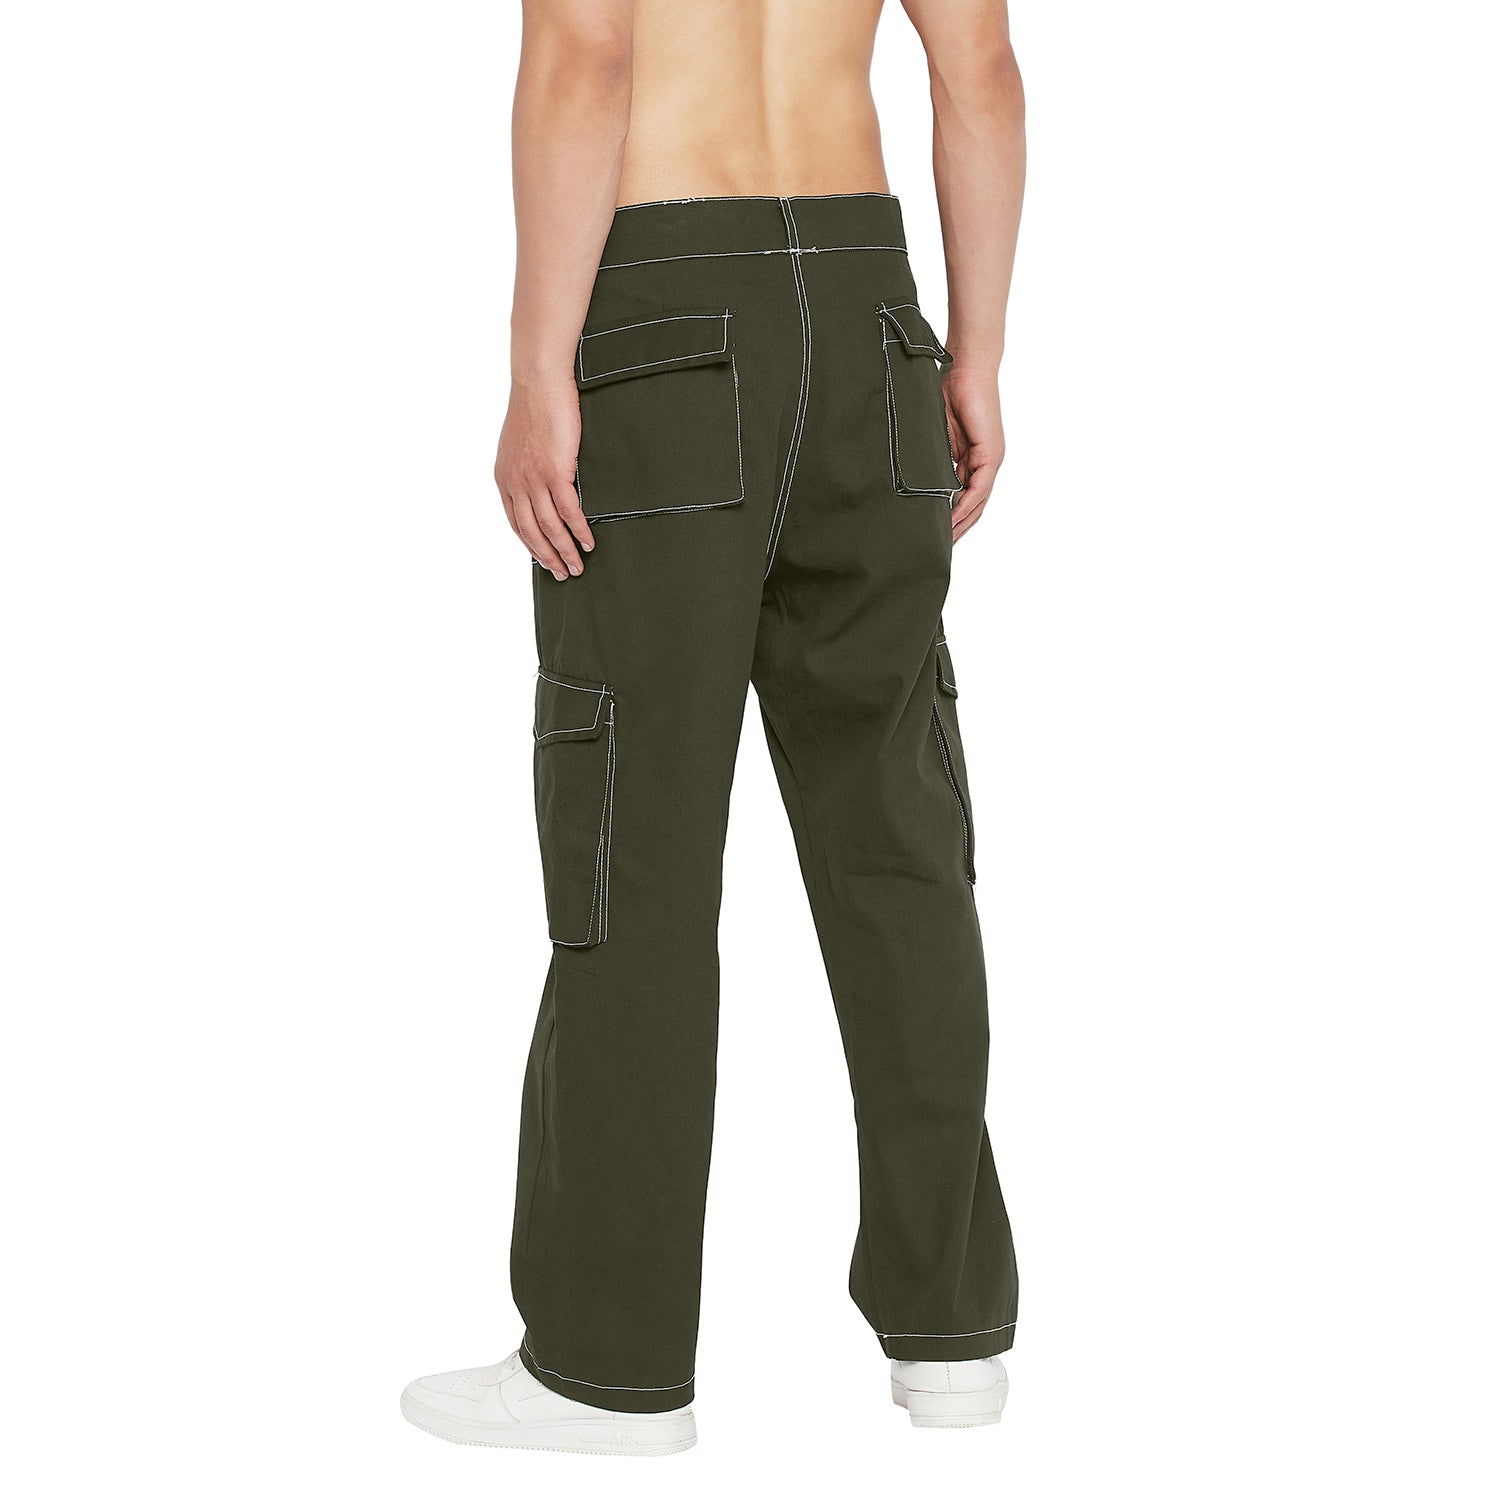 Buy Olive Sport Fit Stretch Cargos Online at Muftijeans